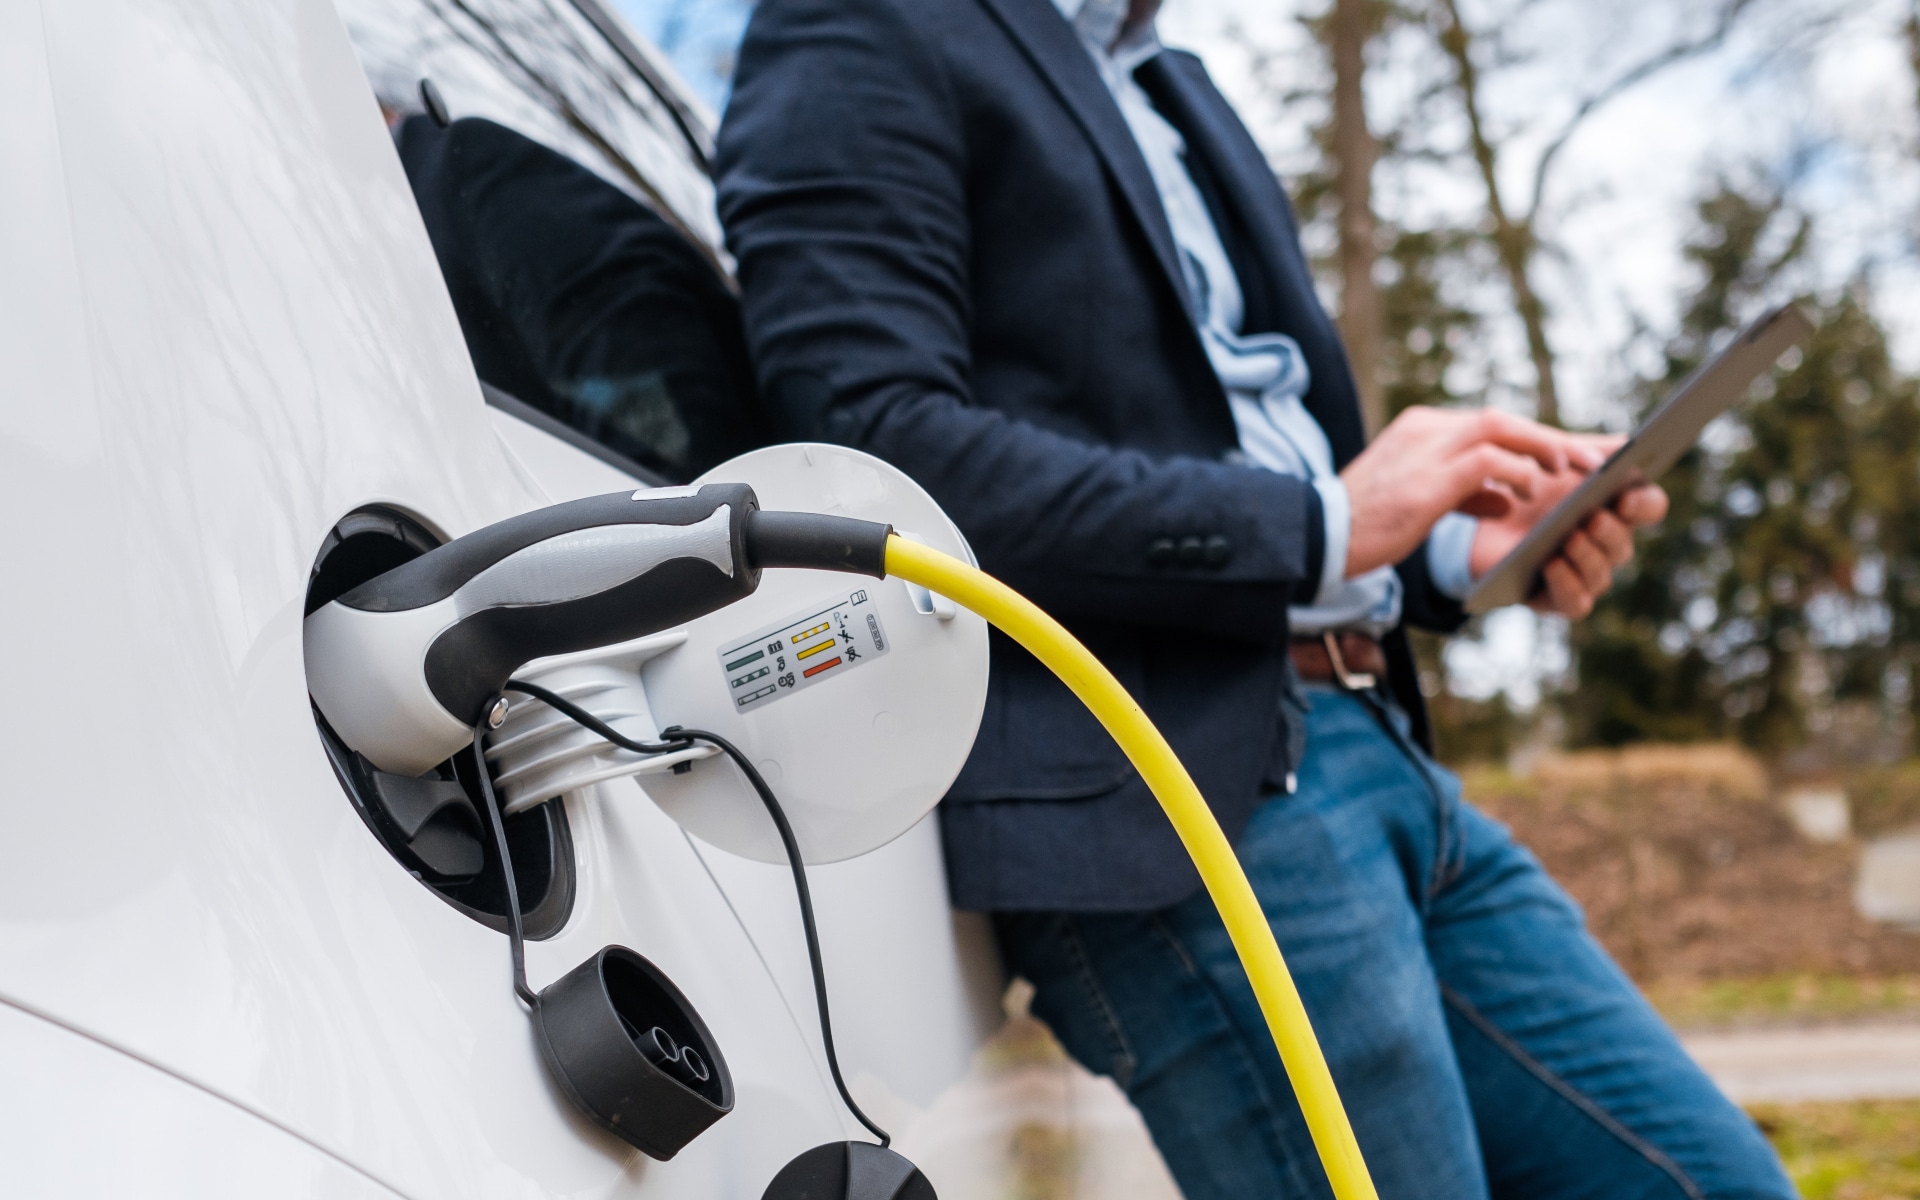 Common Electric Vehicle Myths Debunked